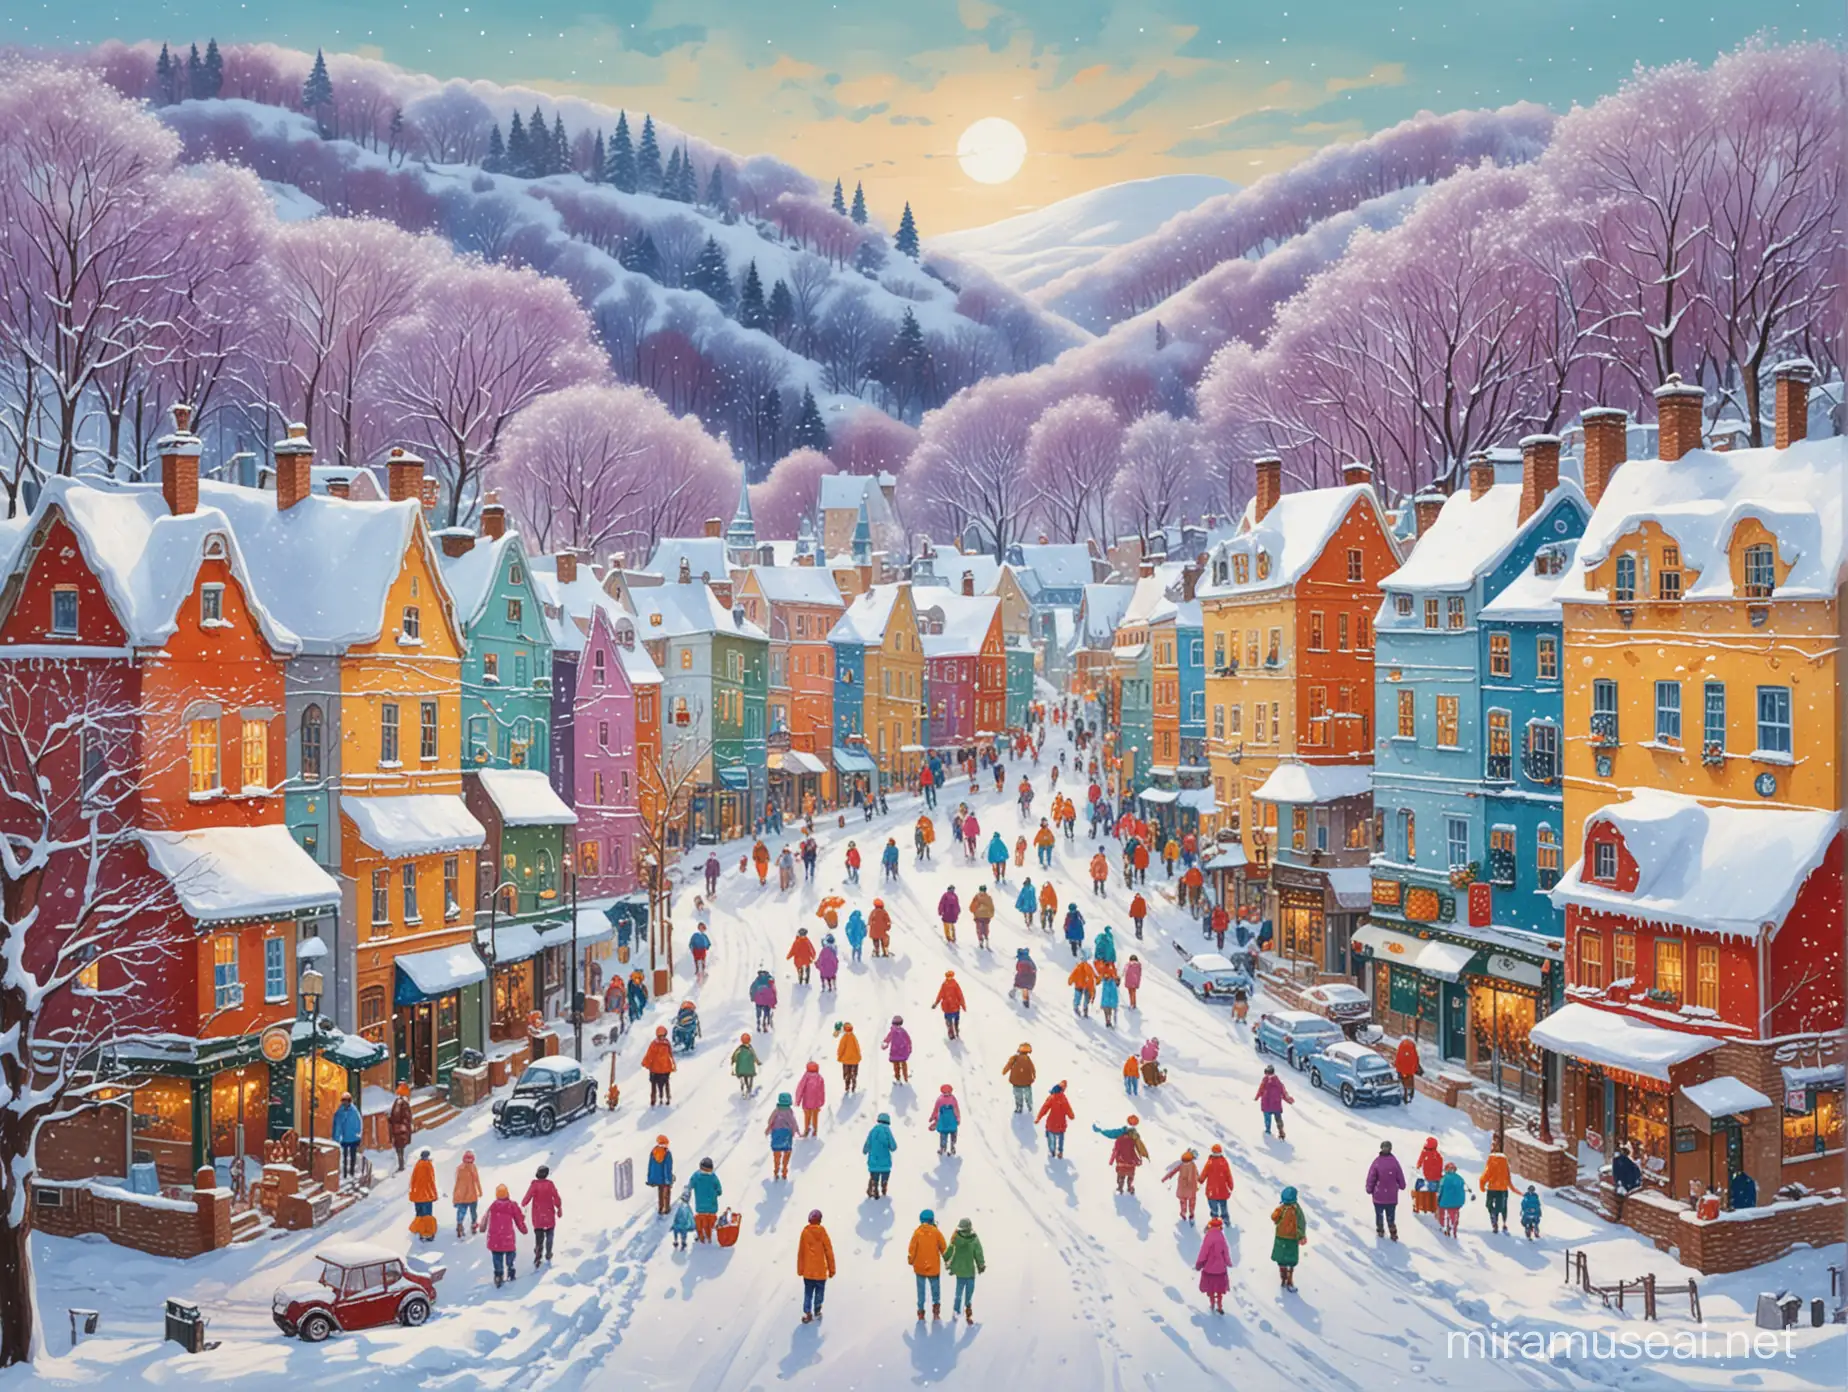 Whimsical Winter Wonderland Vibrant People Amid Snowy Cityscape